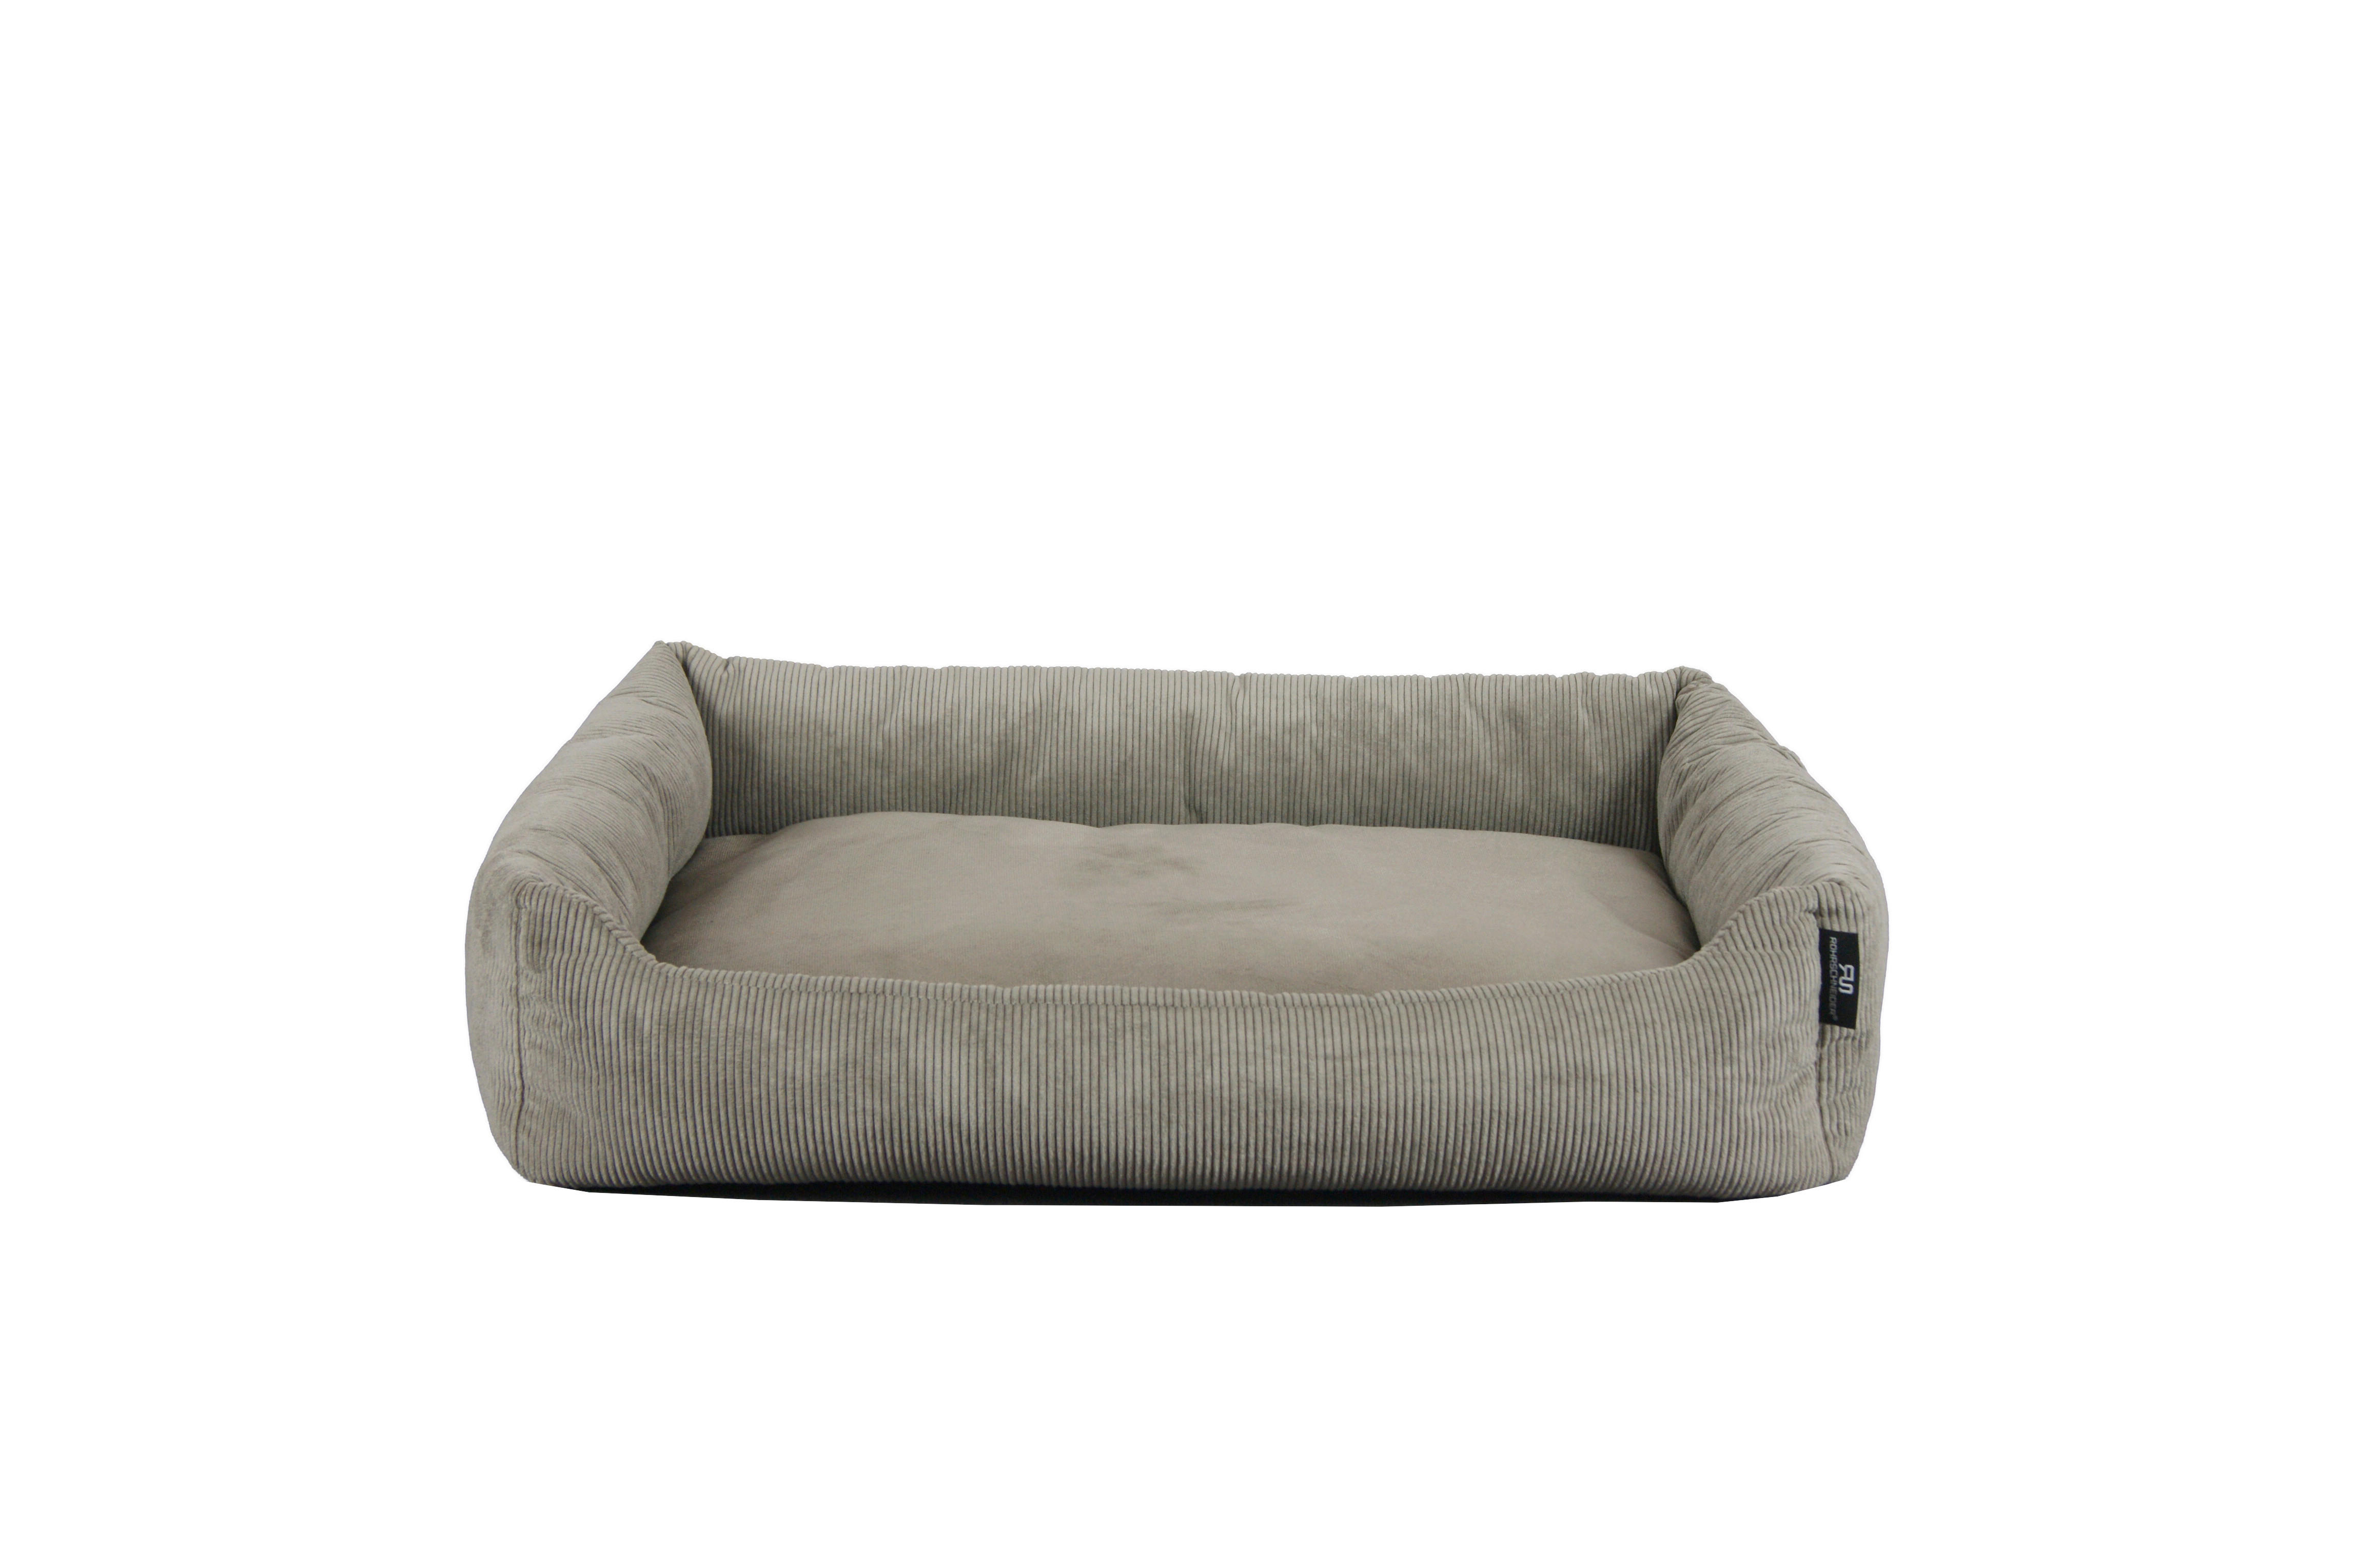 HUNDEBETT MILOW TAUPE - Taupe, KONVENTIONELL, Textil (70/49/15cm)